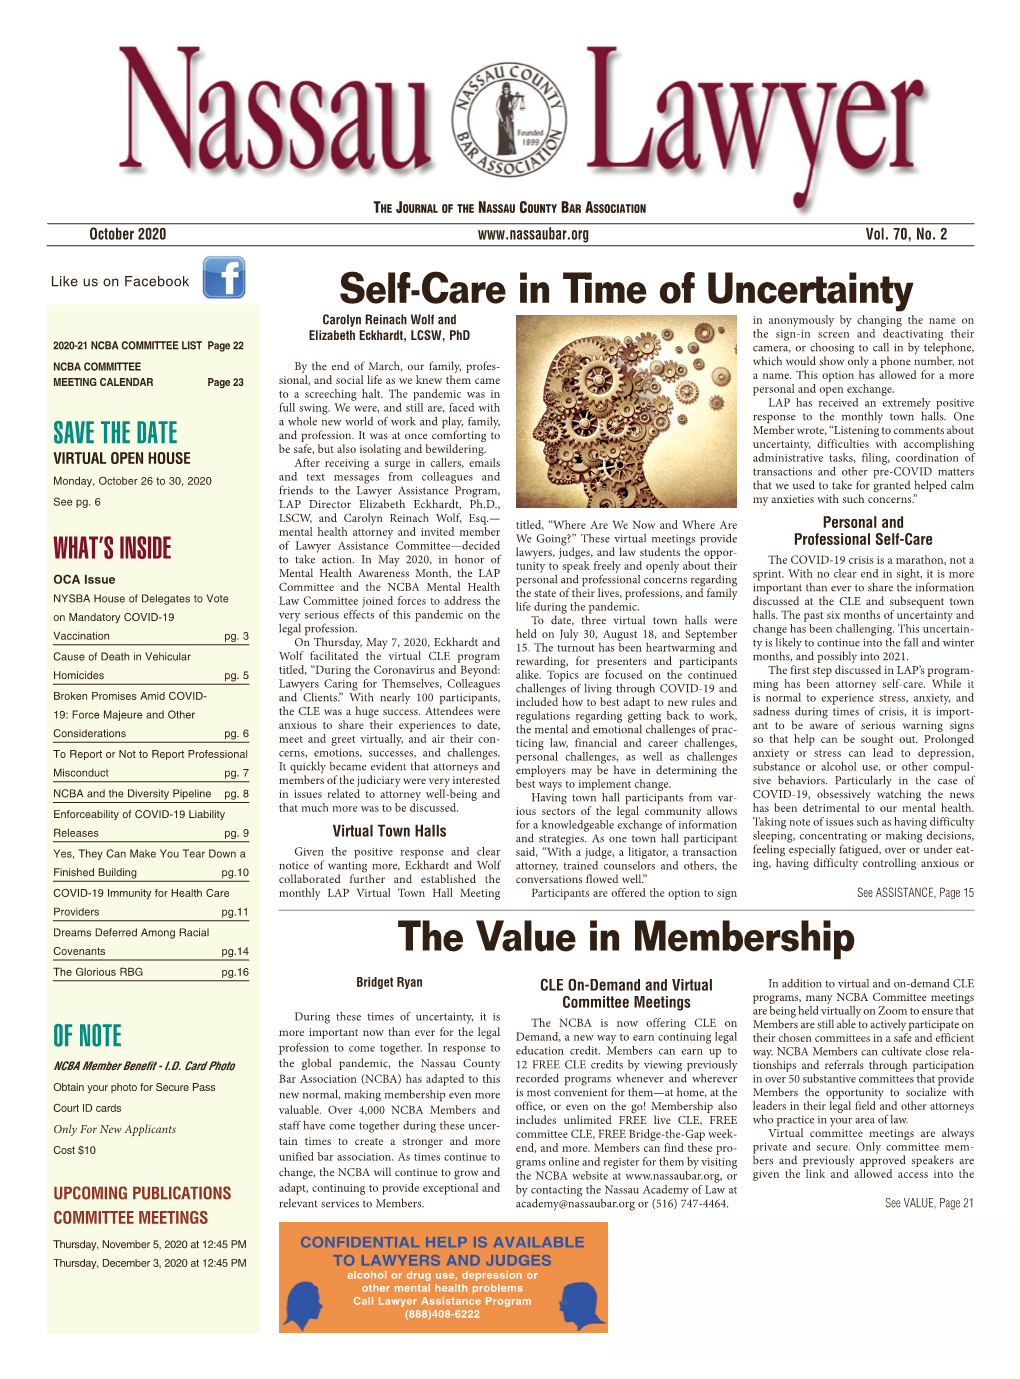 Self-Care in Time of Uncertainty the Value in Membership